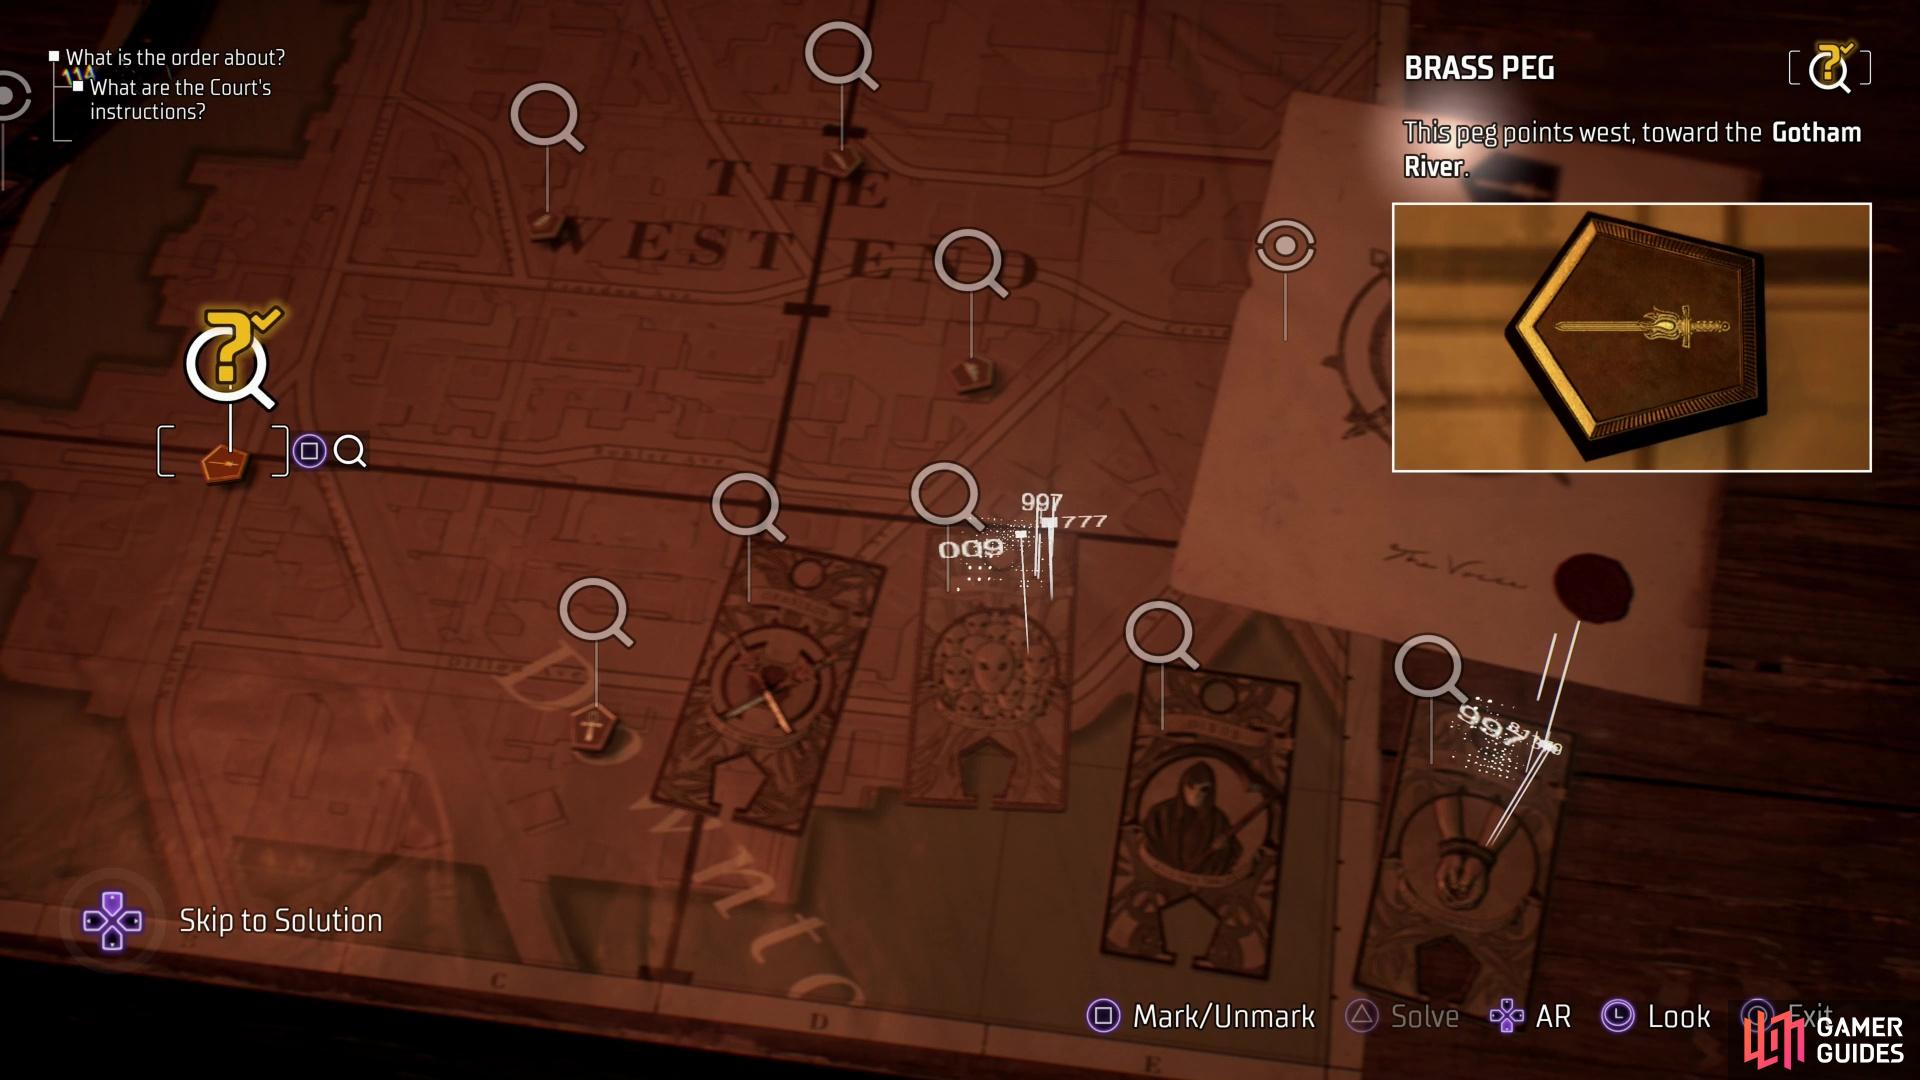 and pegs in a map that indicate a location.